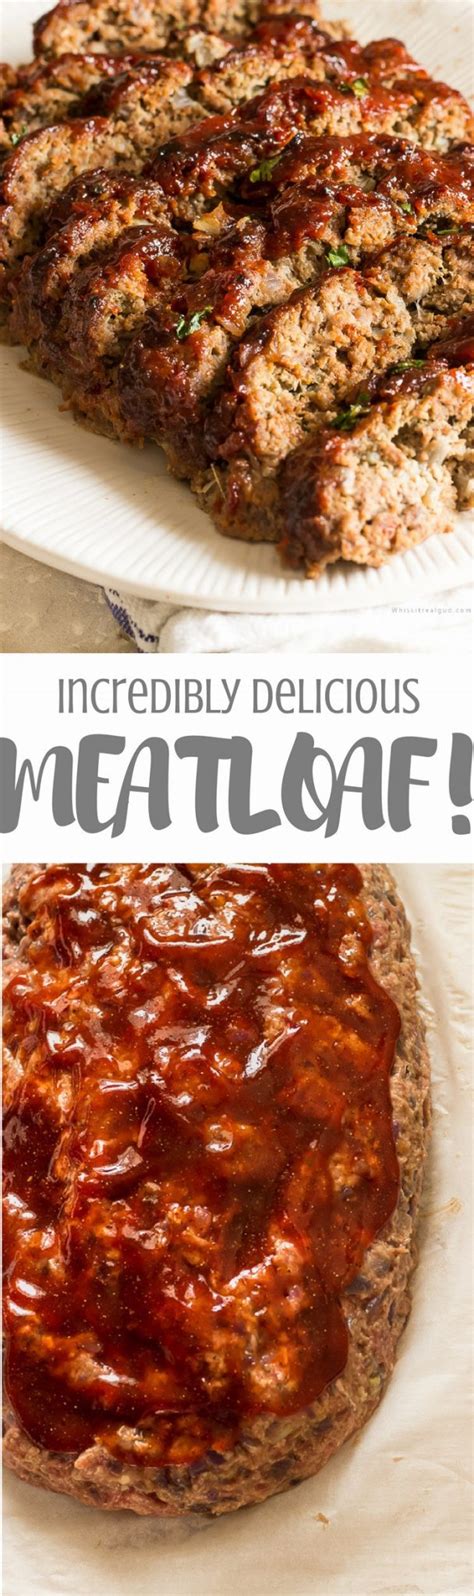 This classic american meatloaf recipe is hearty, humble, and one of the most familiar ground beef recipes of my childhood. 2 Lb Meatloaf Recipe / Meatloaf with Stuffing is a tasty 2 ...